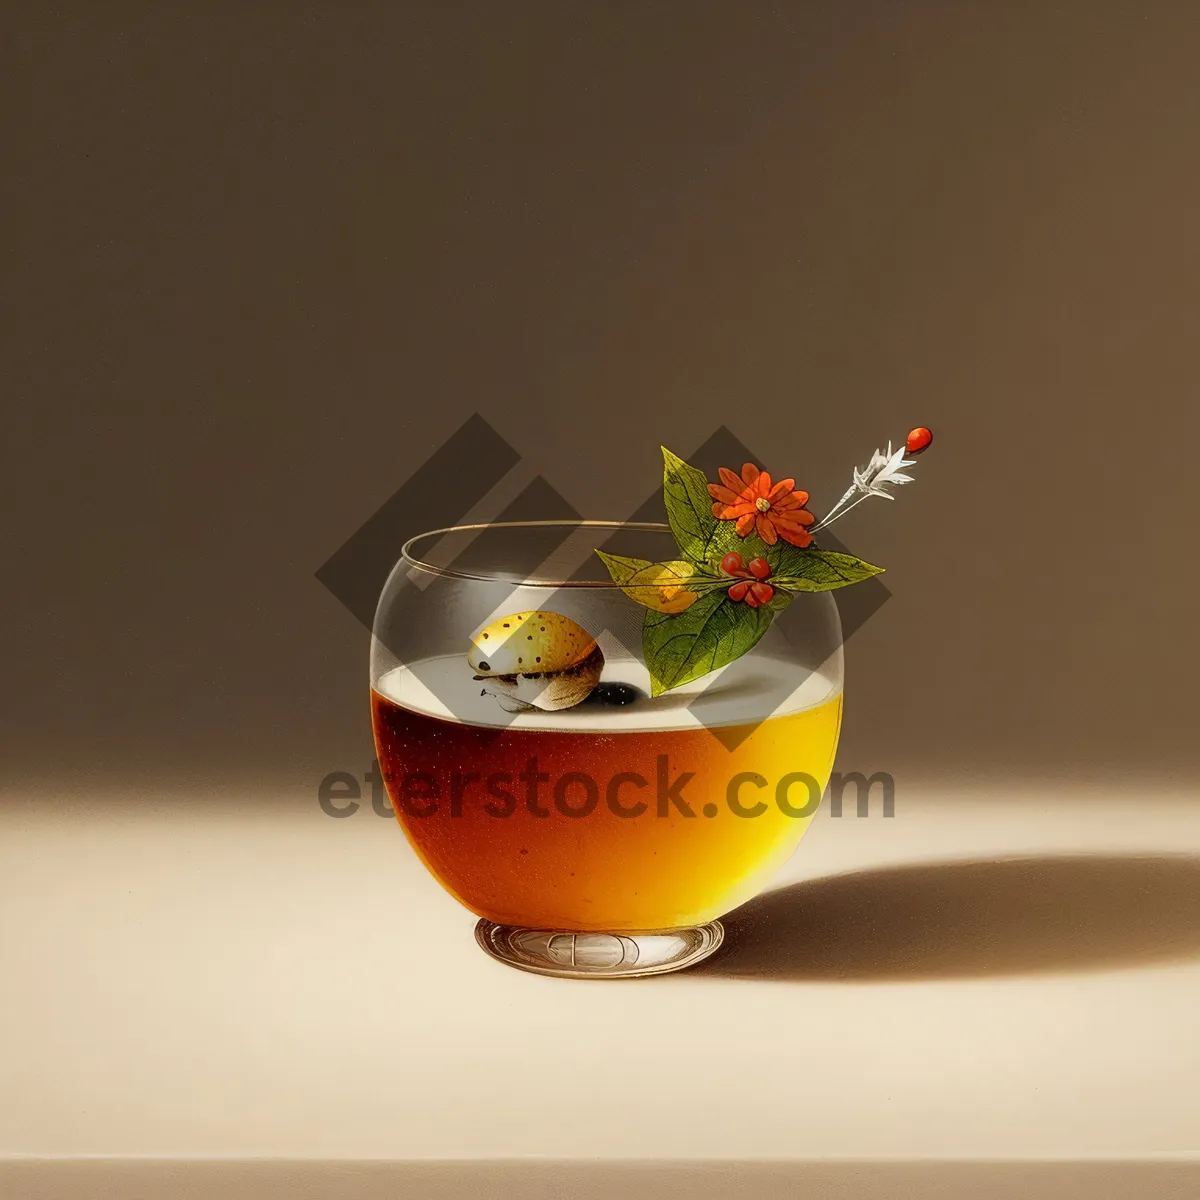 Picture of Delicious Herbal Tea Garnished with Fresh Herbs in a Glass